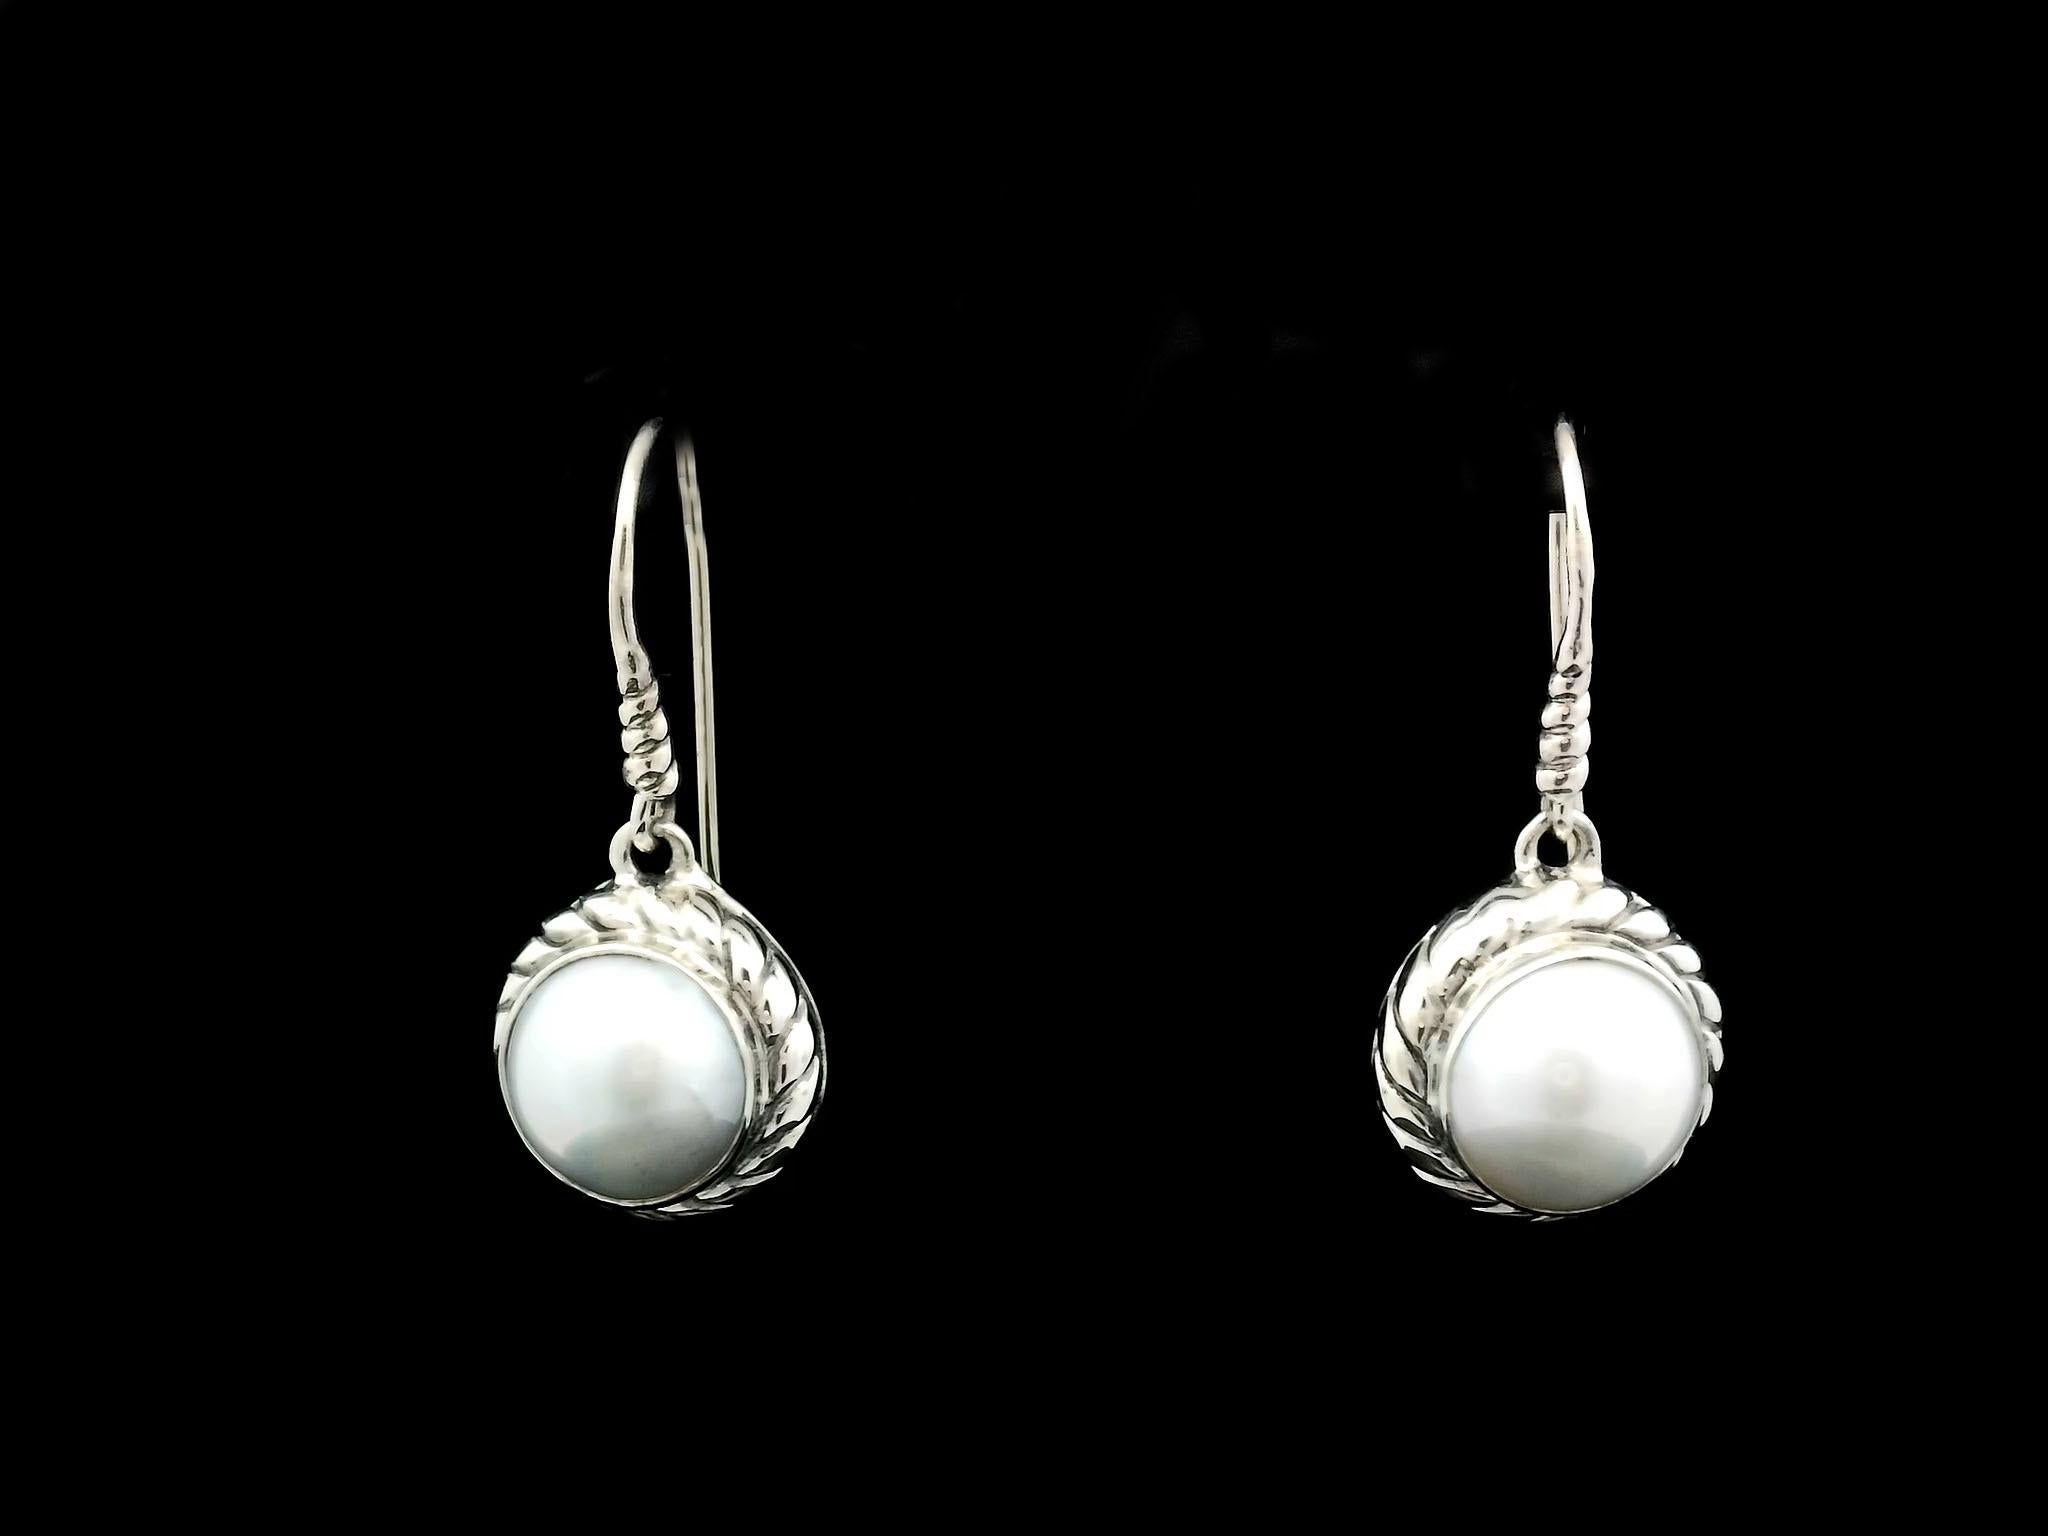 Silver Balinese handcrafted pearl drop earrings are exquisite pieces of jewelry that combine the artistry of Balinese craftsmanship with the elegance of pearls. Balinese silverwork is known for its intricate designs and attention to detail. Here's a